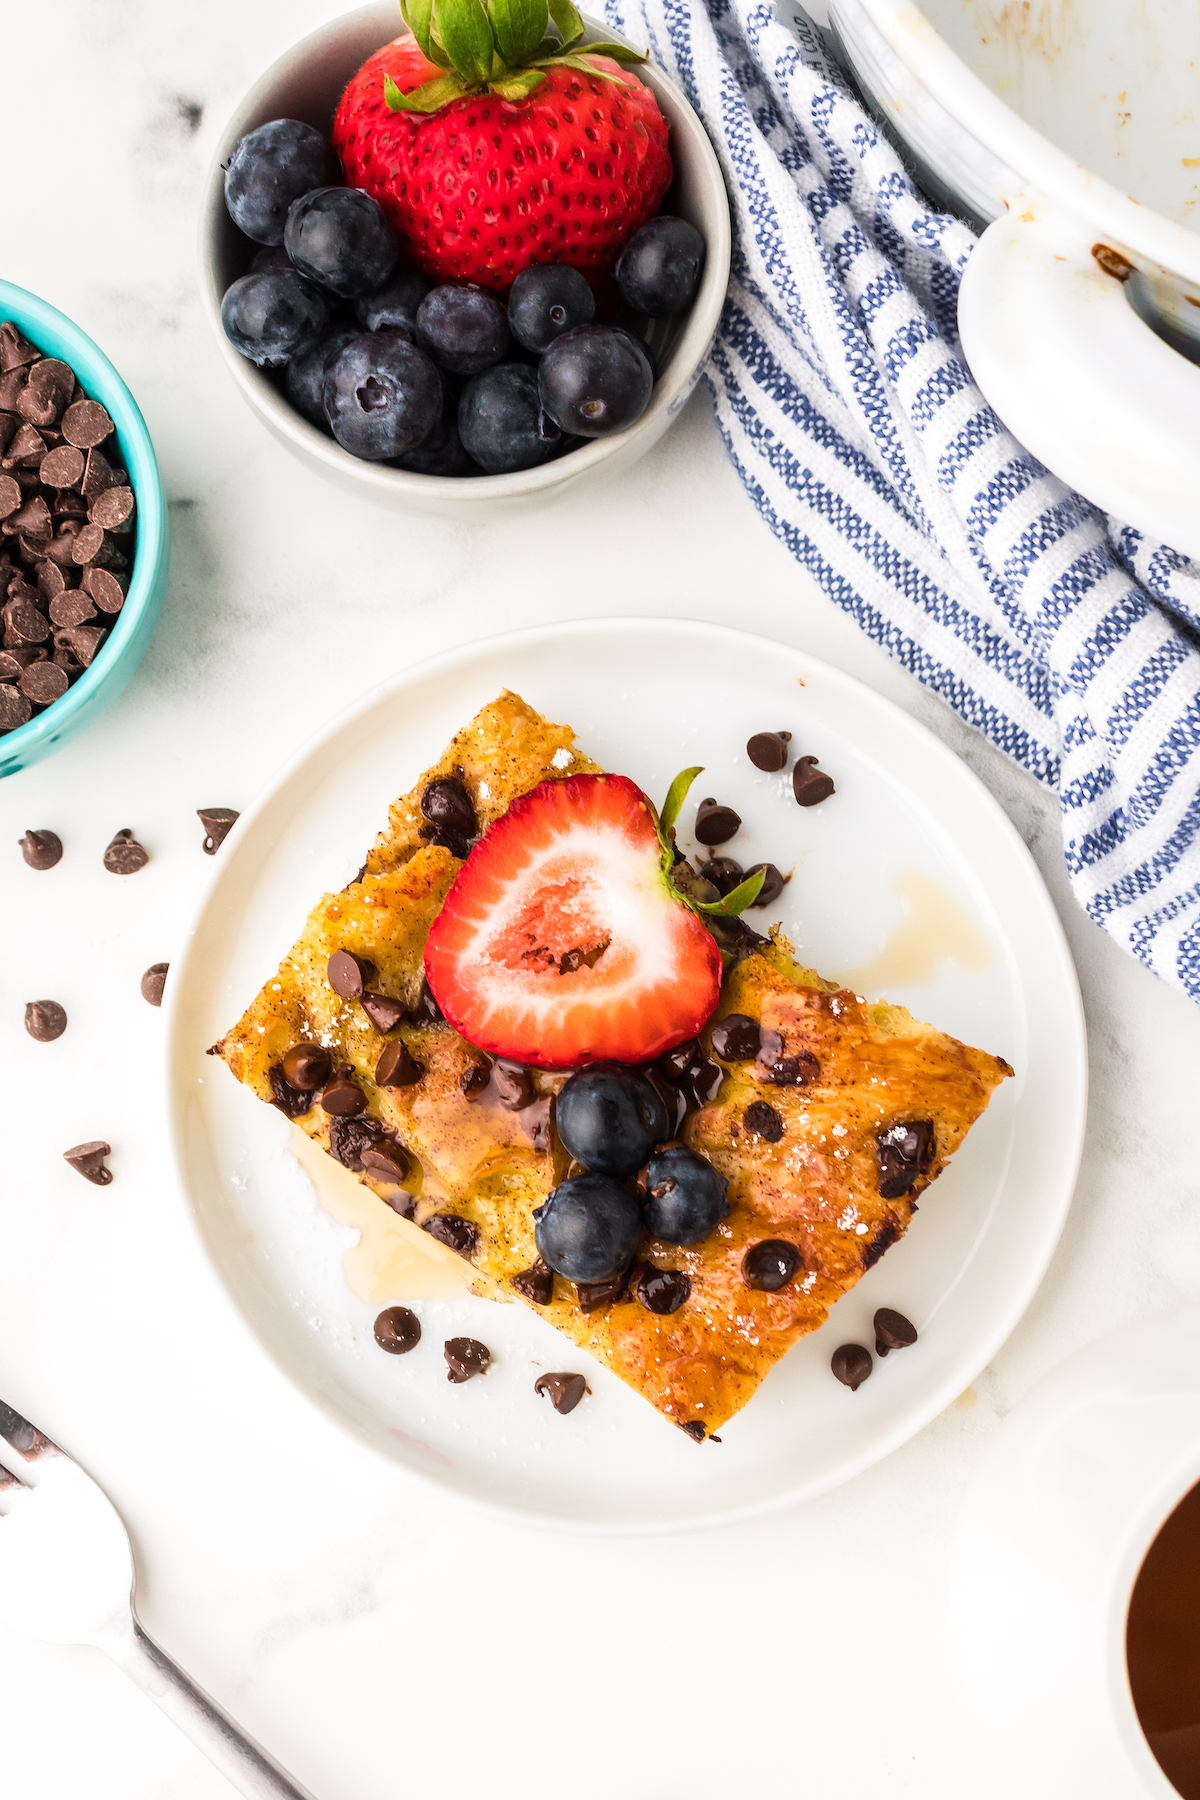 Slice of chocolate chip croissant French toast bake with chocolate chips, honey, blueberries, and strawberries.